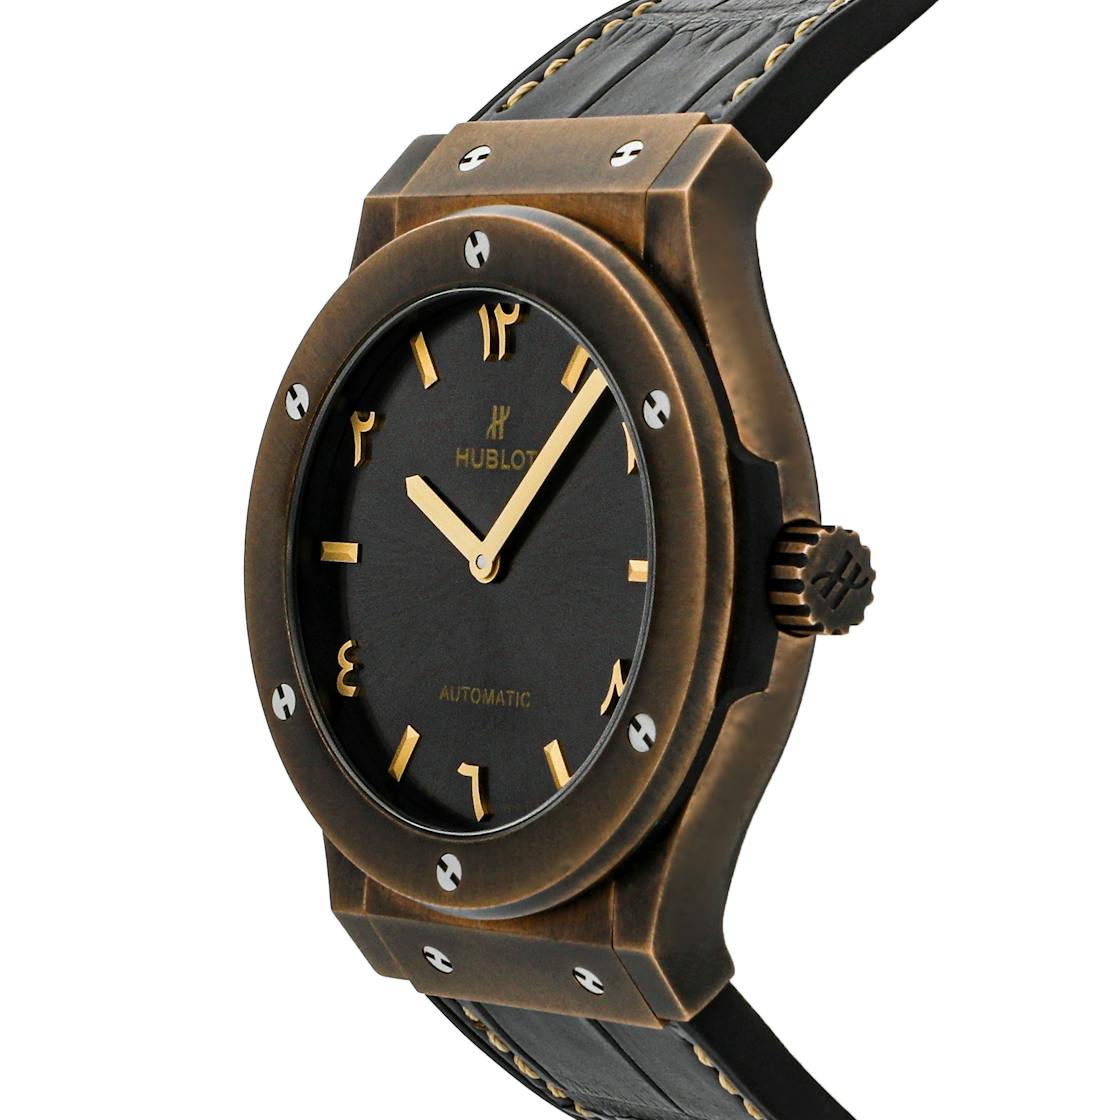 The Most Wanted Hublot Watches - Cagau, Dubai